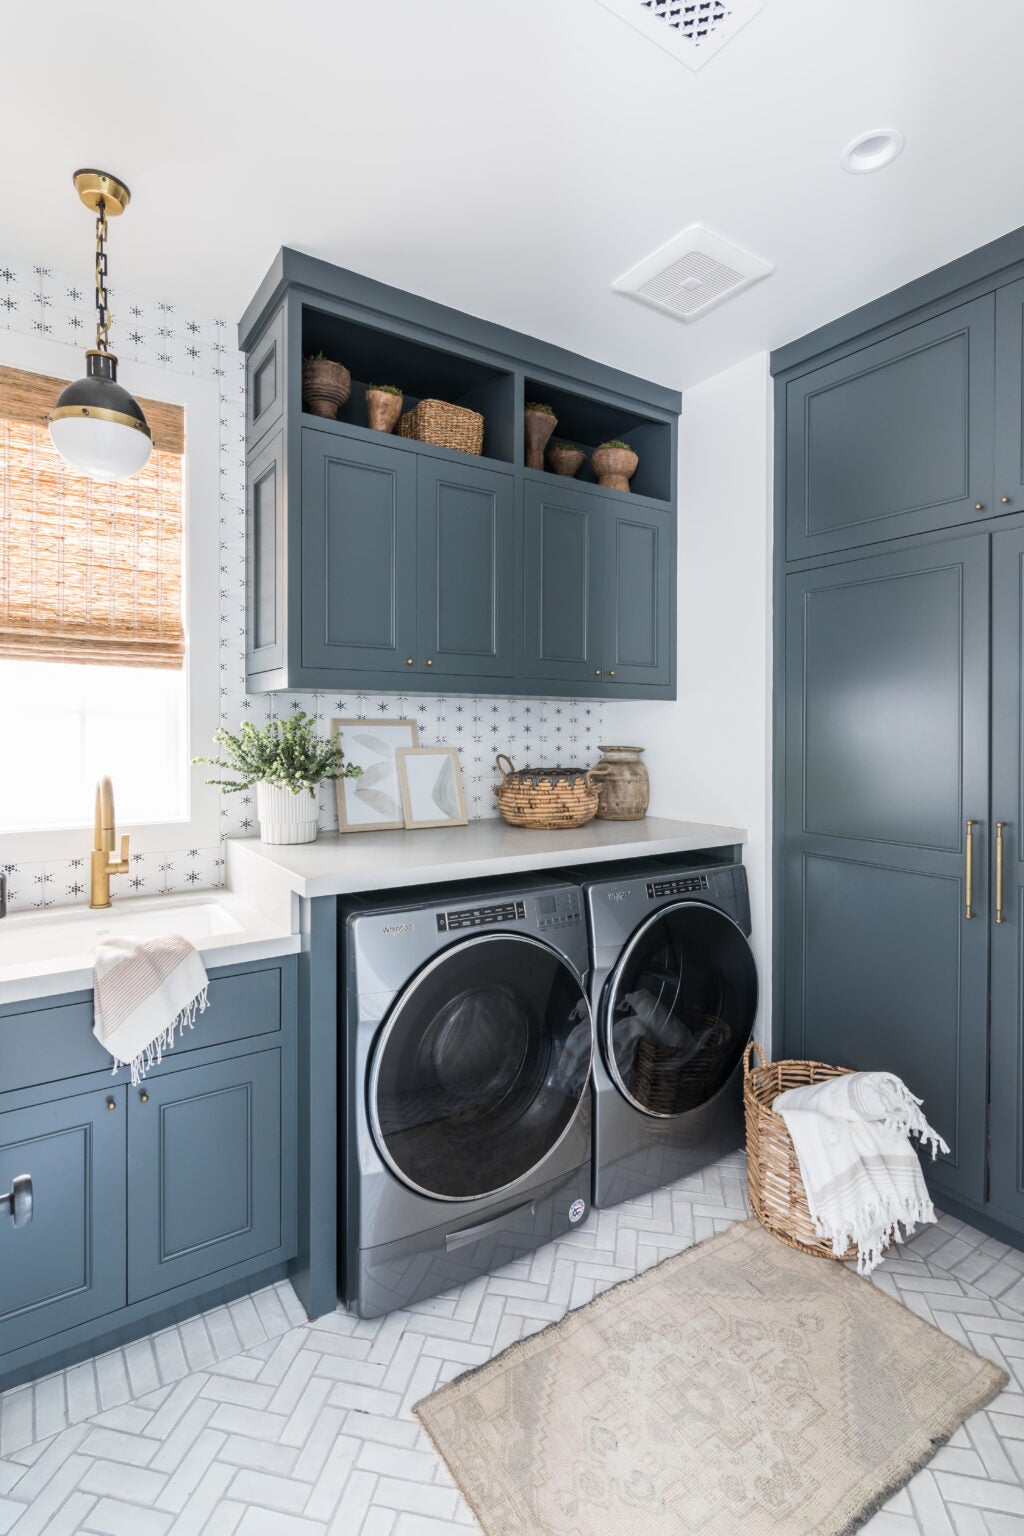 The 6 Best Washer And Dryer Sets in 2022 | domino